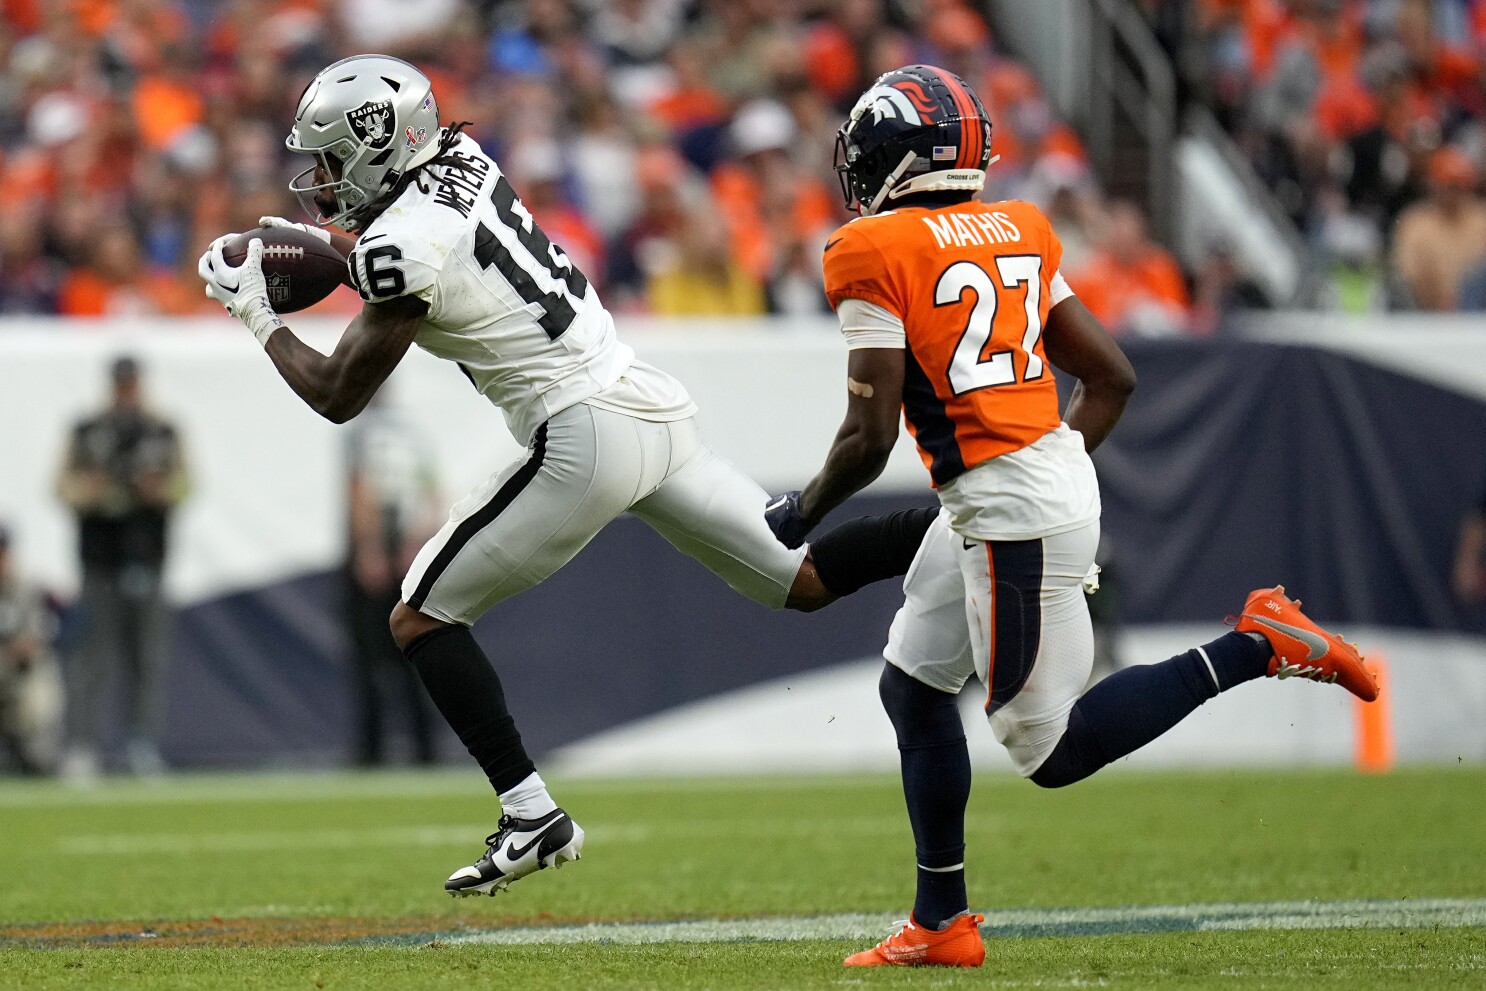 The Raiders must clean up mistakes after overcoming them to beat the Broncos